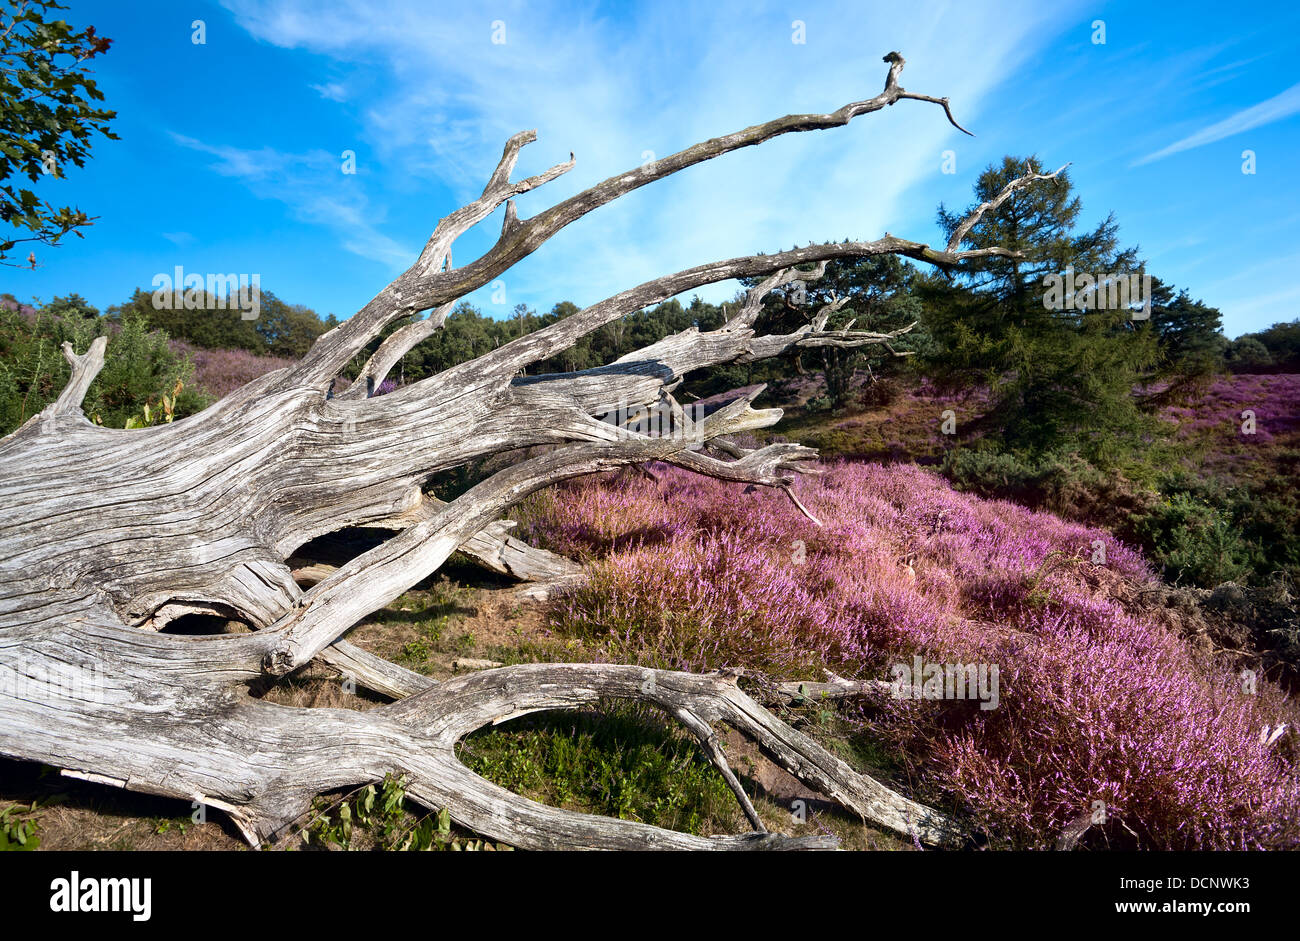 old dry tree among pink flowering heather Stock Photo